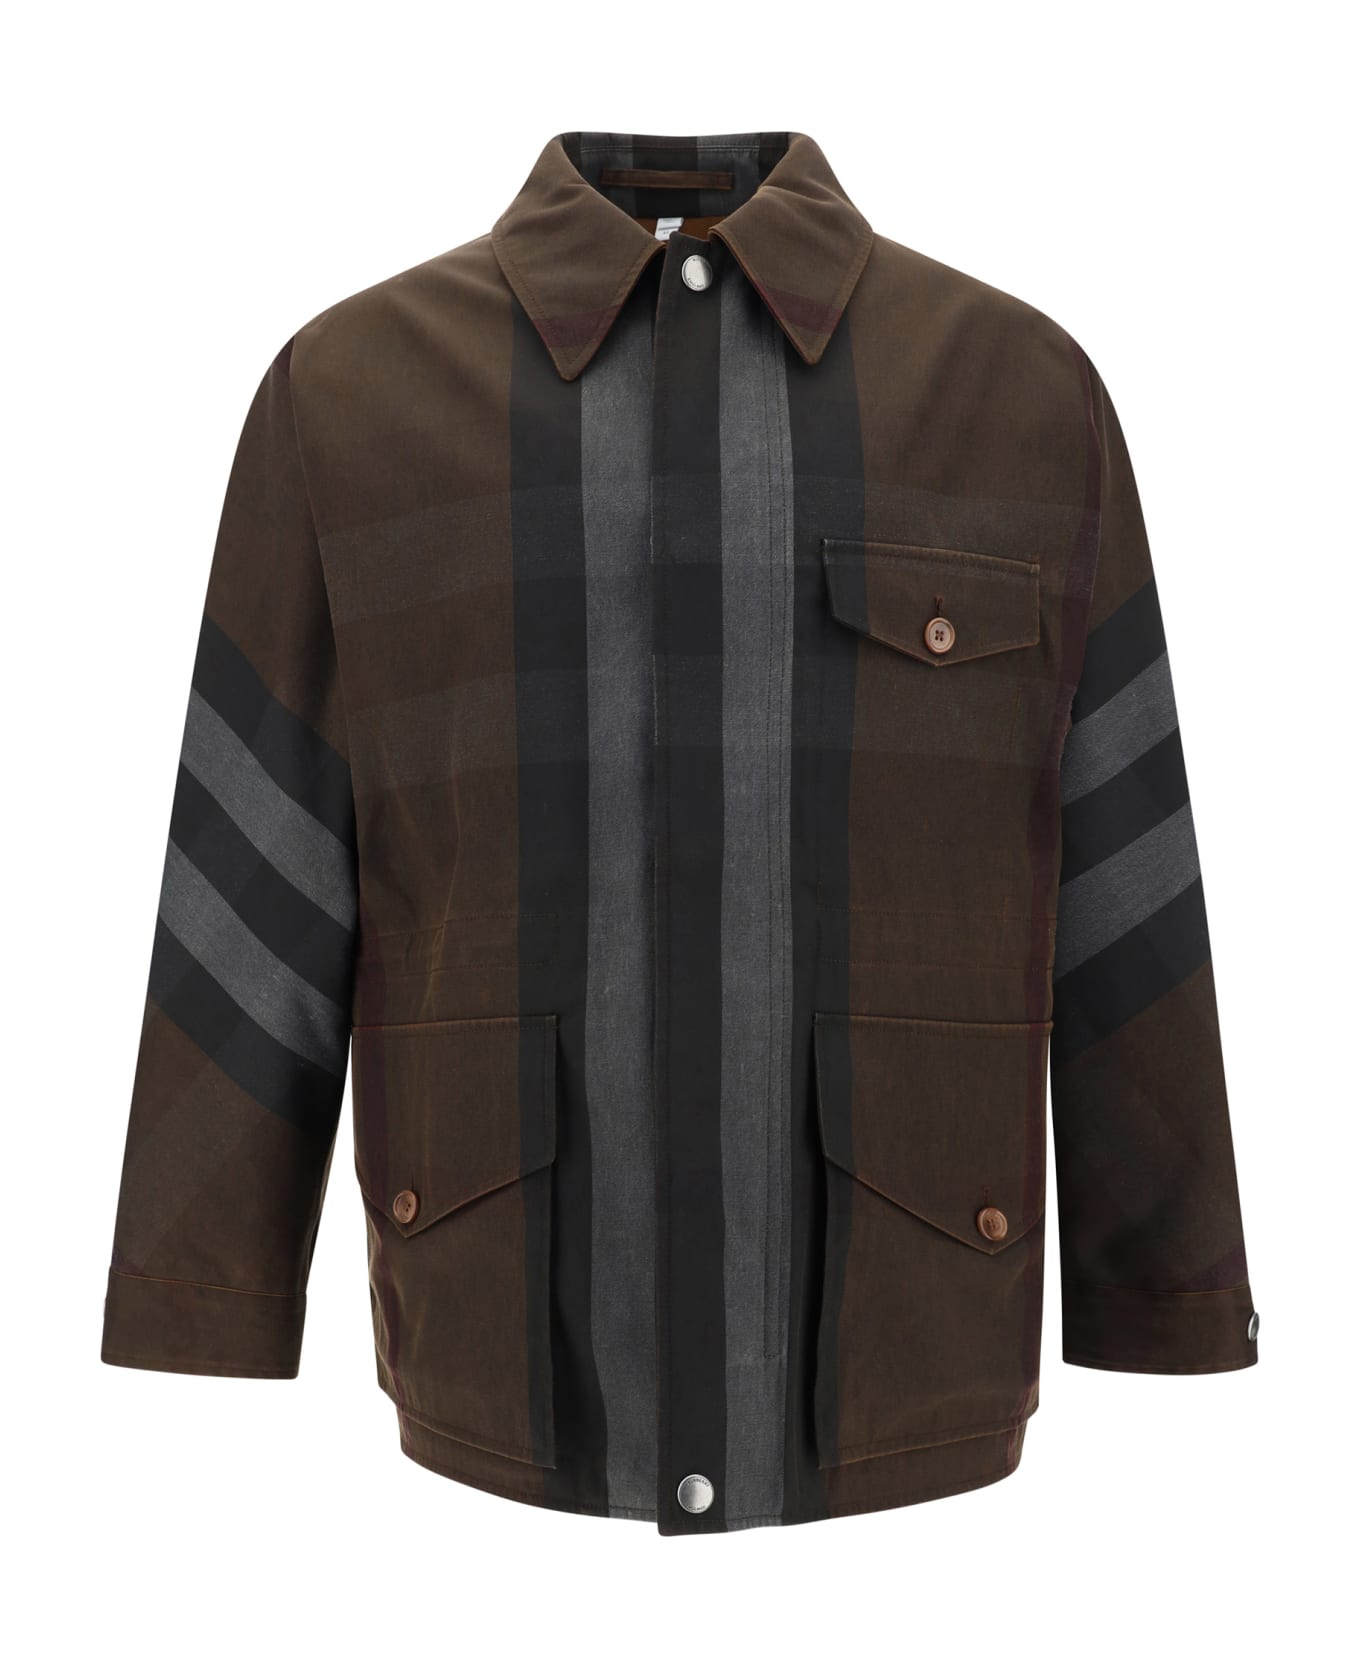 Burberry Field Check Jacket - Brown ジャケット